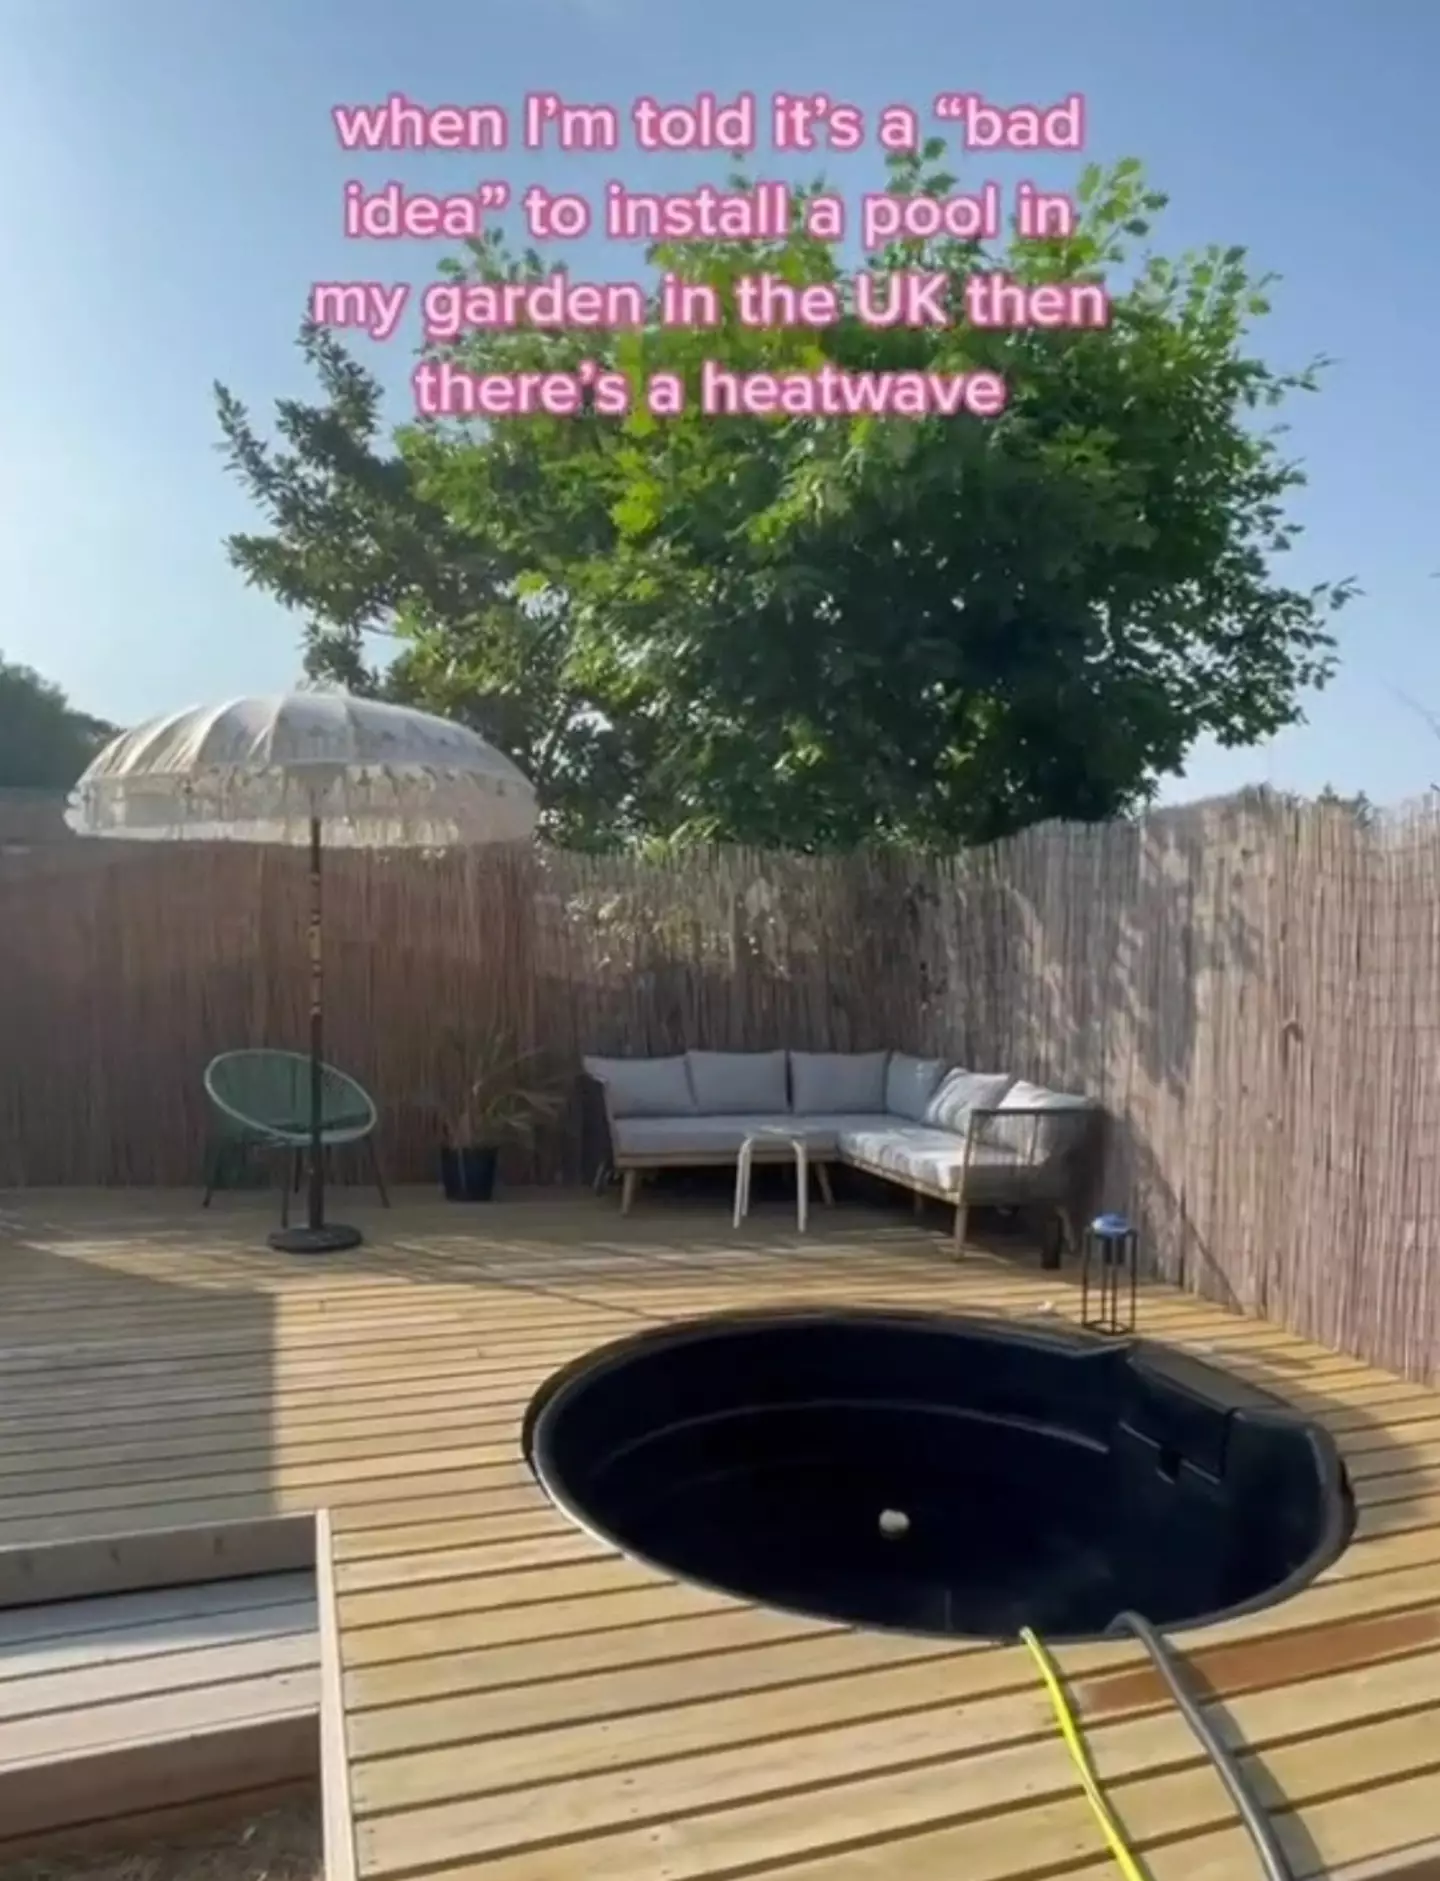 Zoe London said people told her it was a 'bad idea' to build a pool.